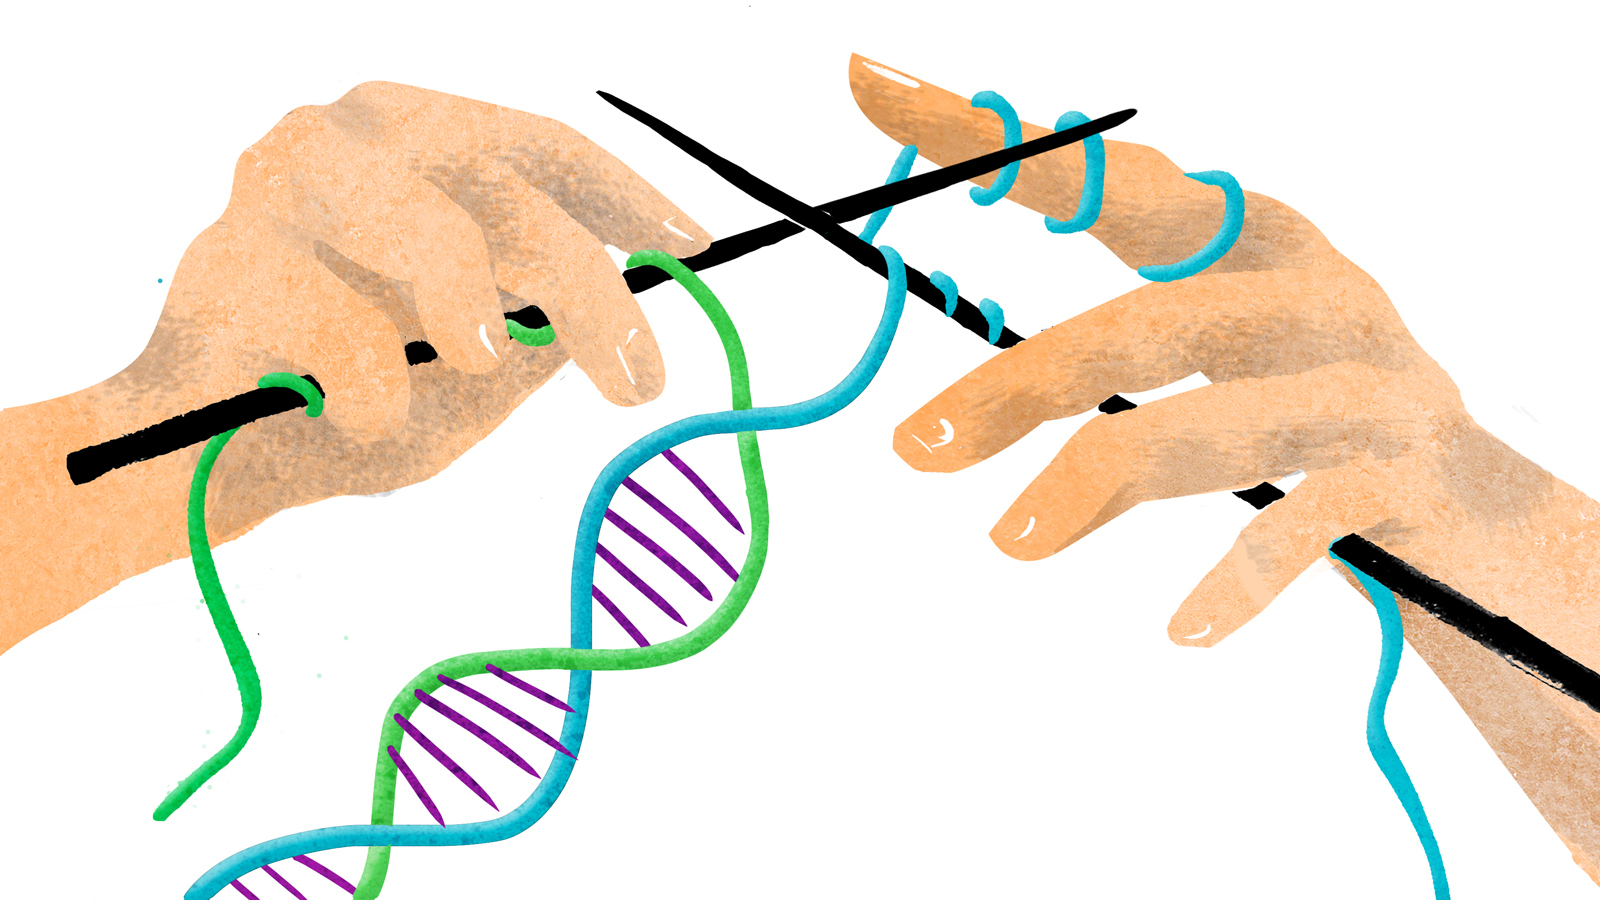 Combining The DNA Of Three People Raises Ethical Questions | KUOW News and Information